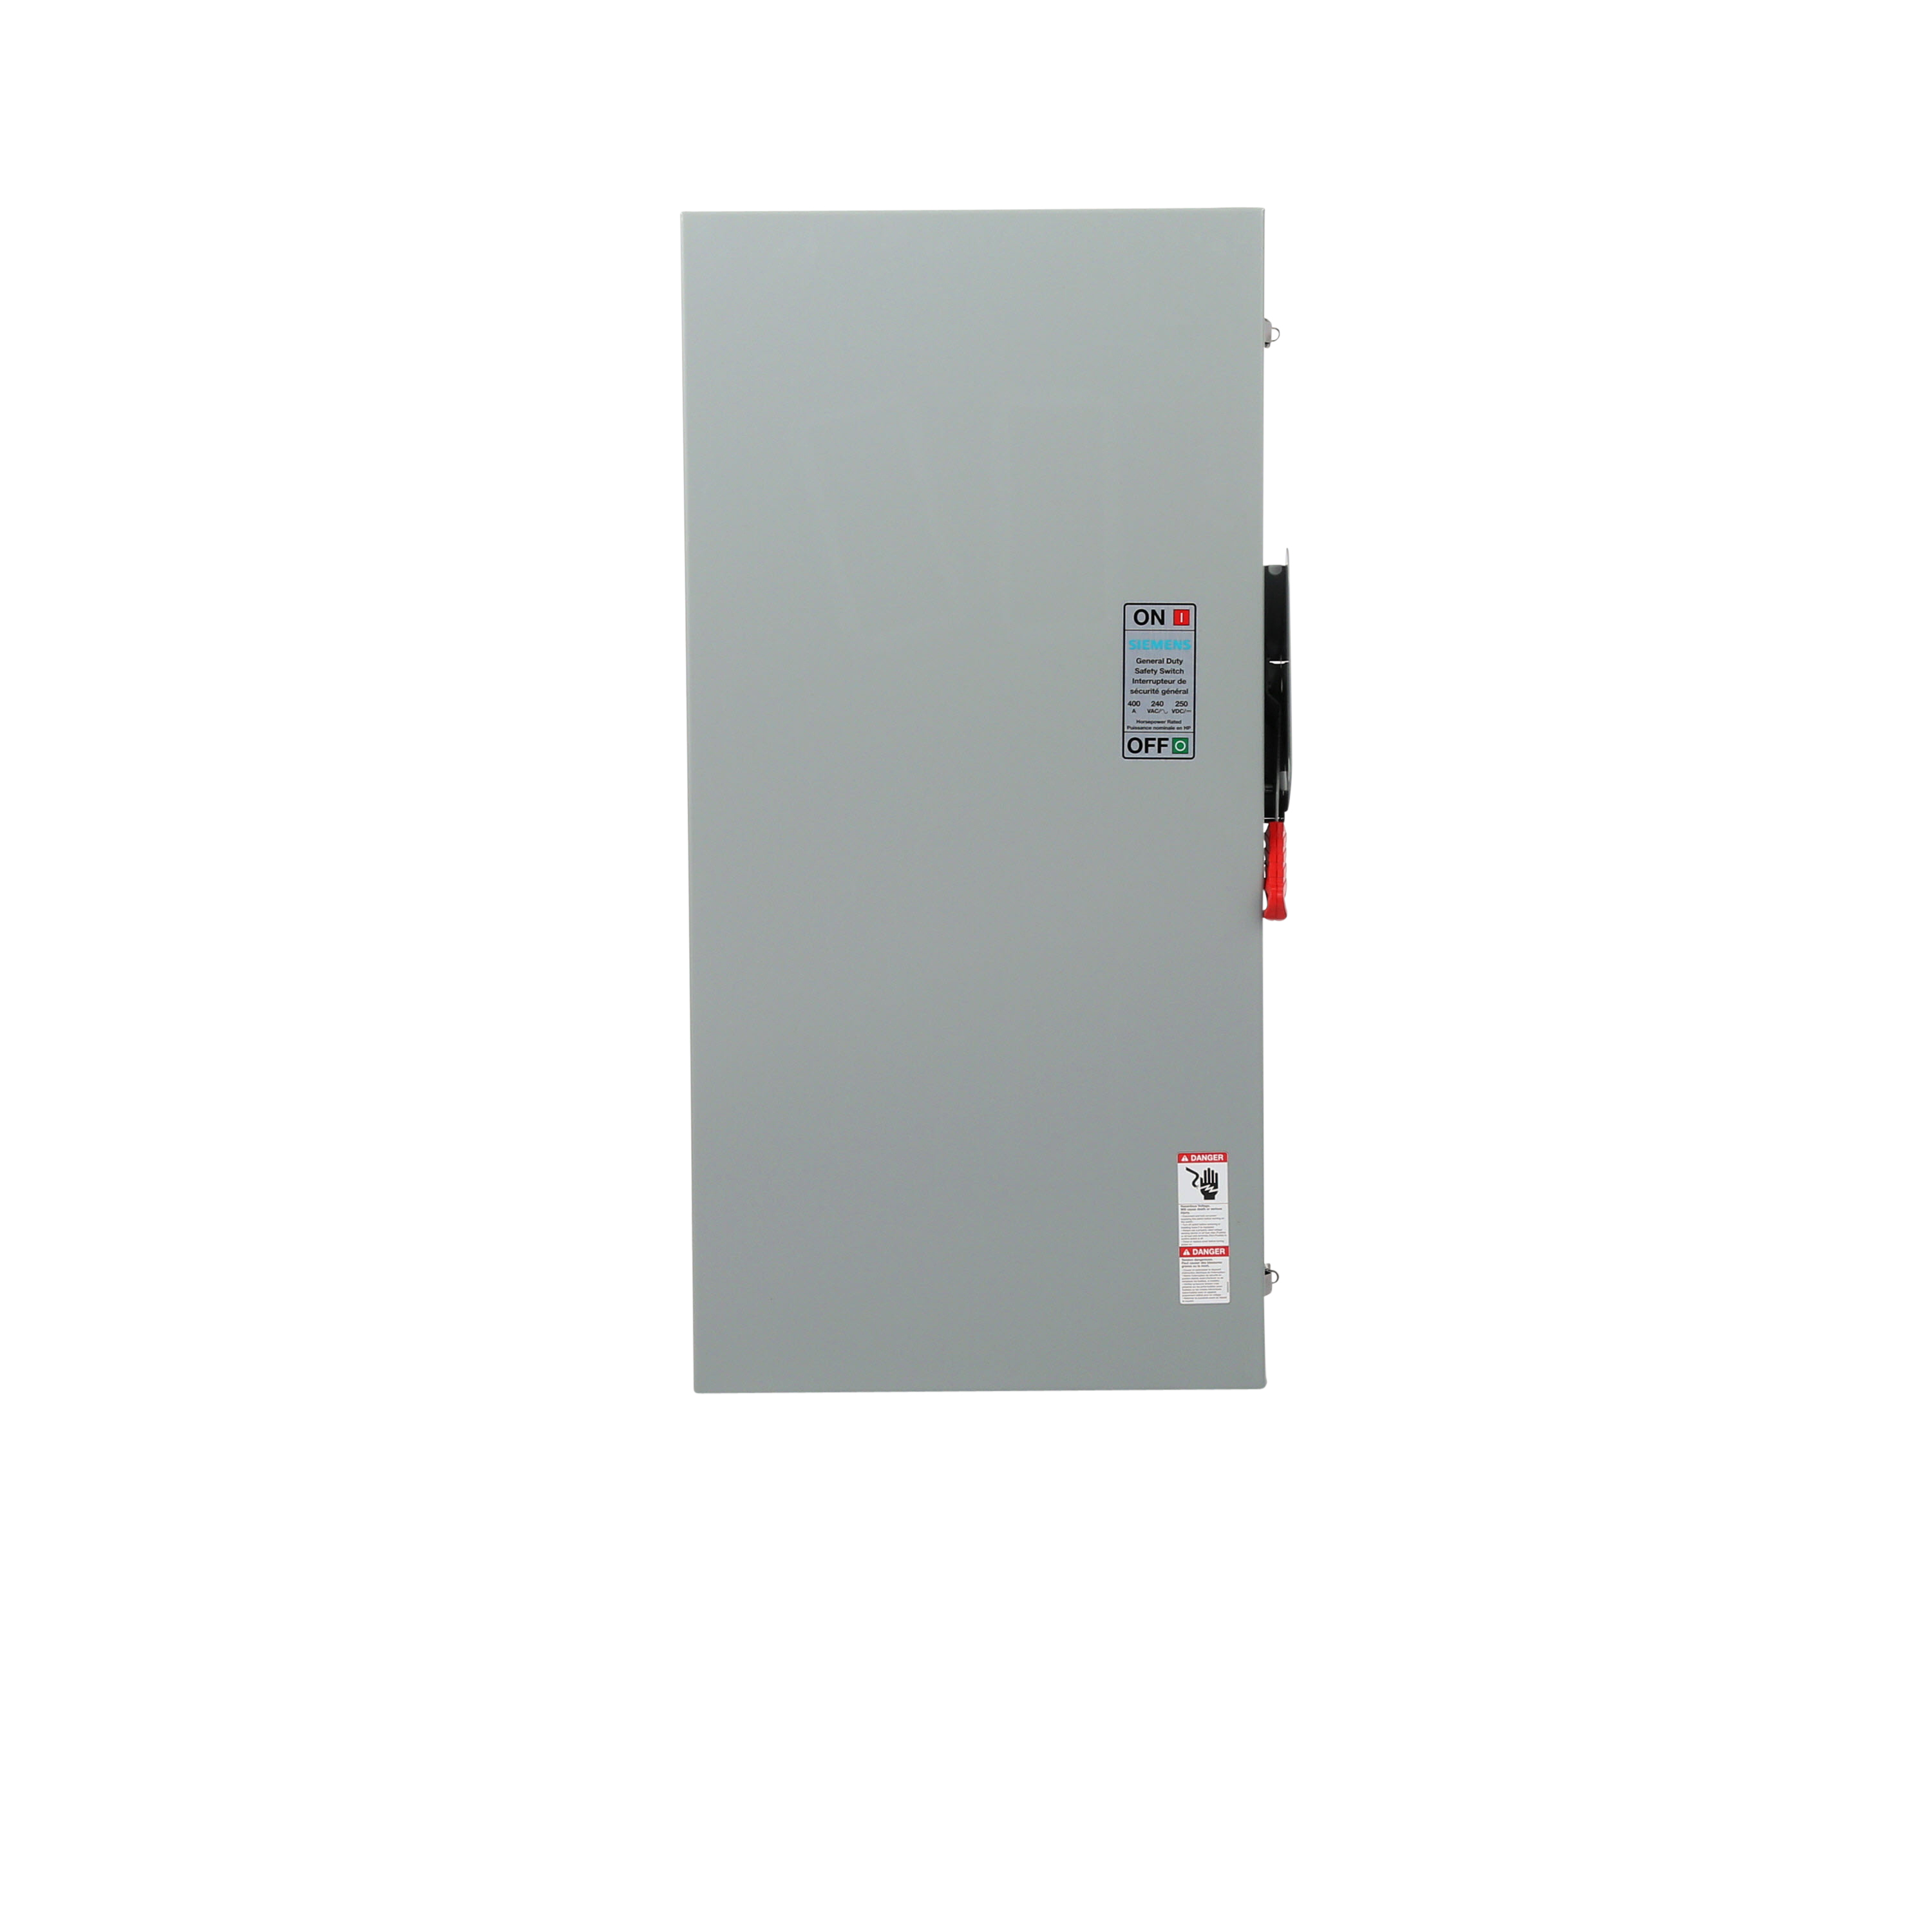 Siemens GF325NRA Fused Low Voltage General Duty Safety Switch With Neutral, 240 VAC/250 VDC, 400 A, 15 hp, 50 hp, TPST Contact, 3 Poles